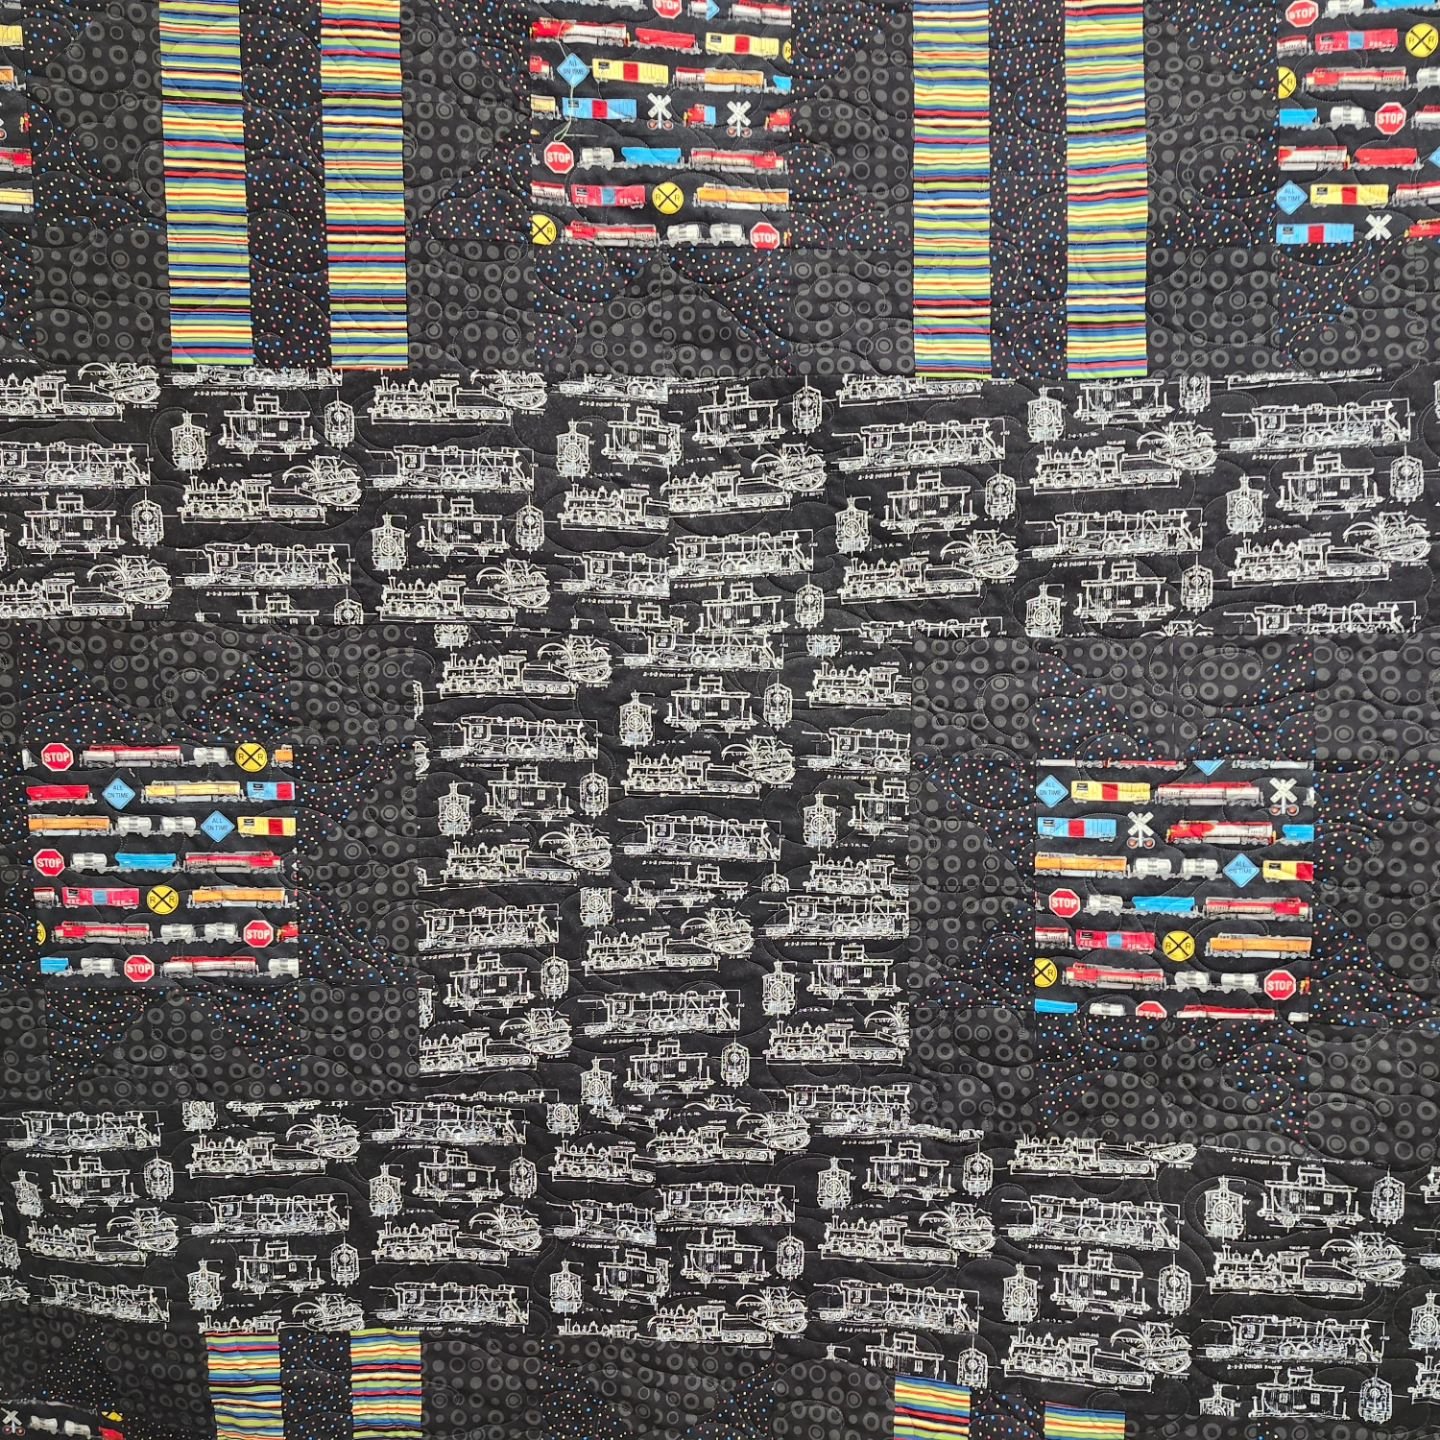 Linda was in today to longarm this great train quilt. She chose a pattern called 'oriental clouds', which simulates smoke.  The back also has some wonderful train panels  #longarmmachinerentals ##quiltfun ##quiltyourselfawesome ##quilting ##gammillst